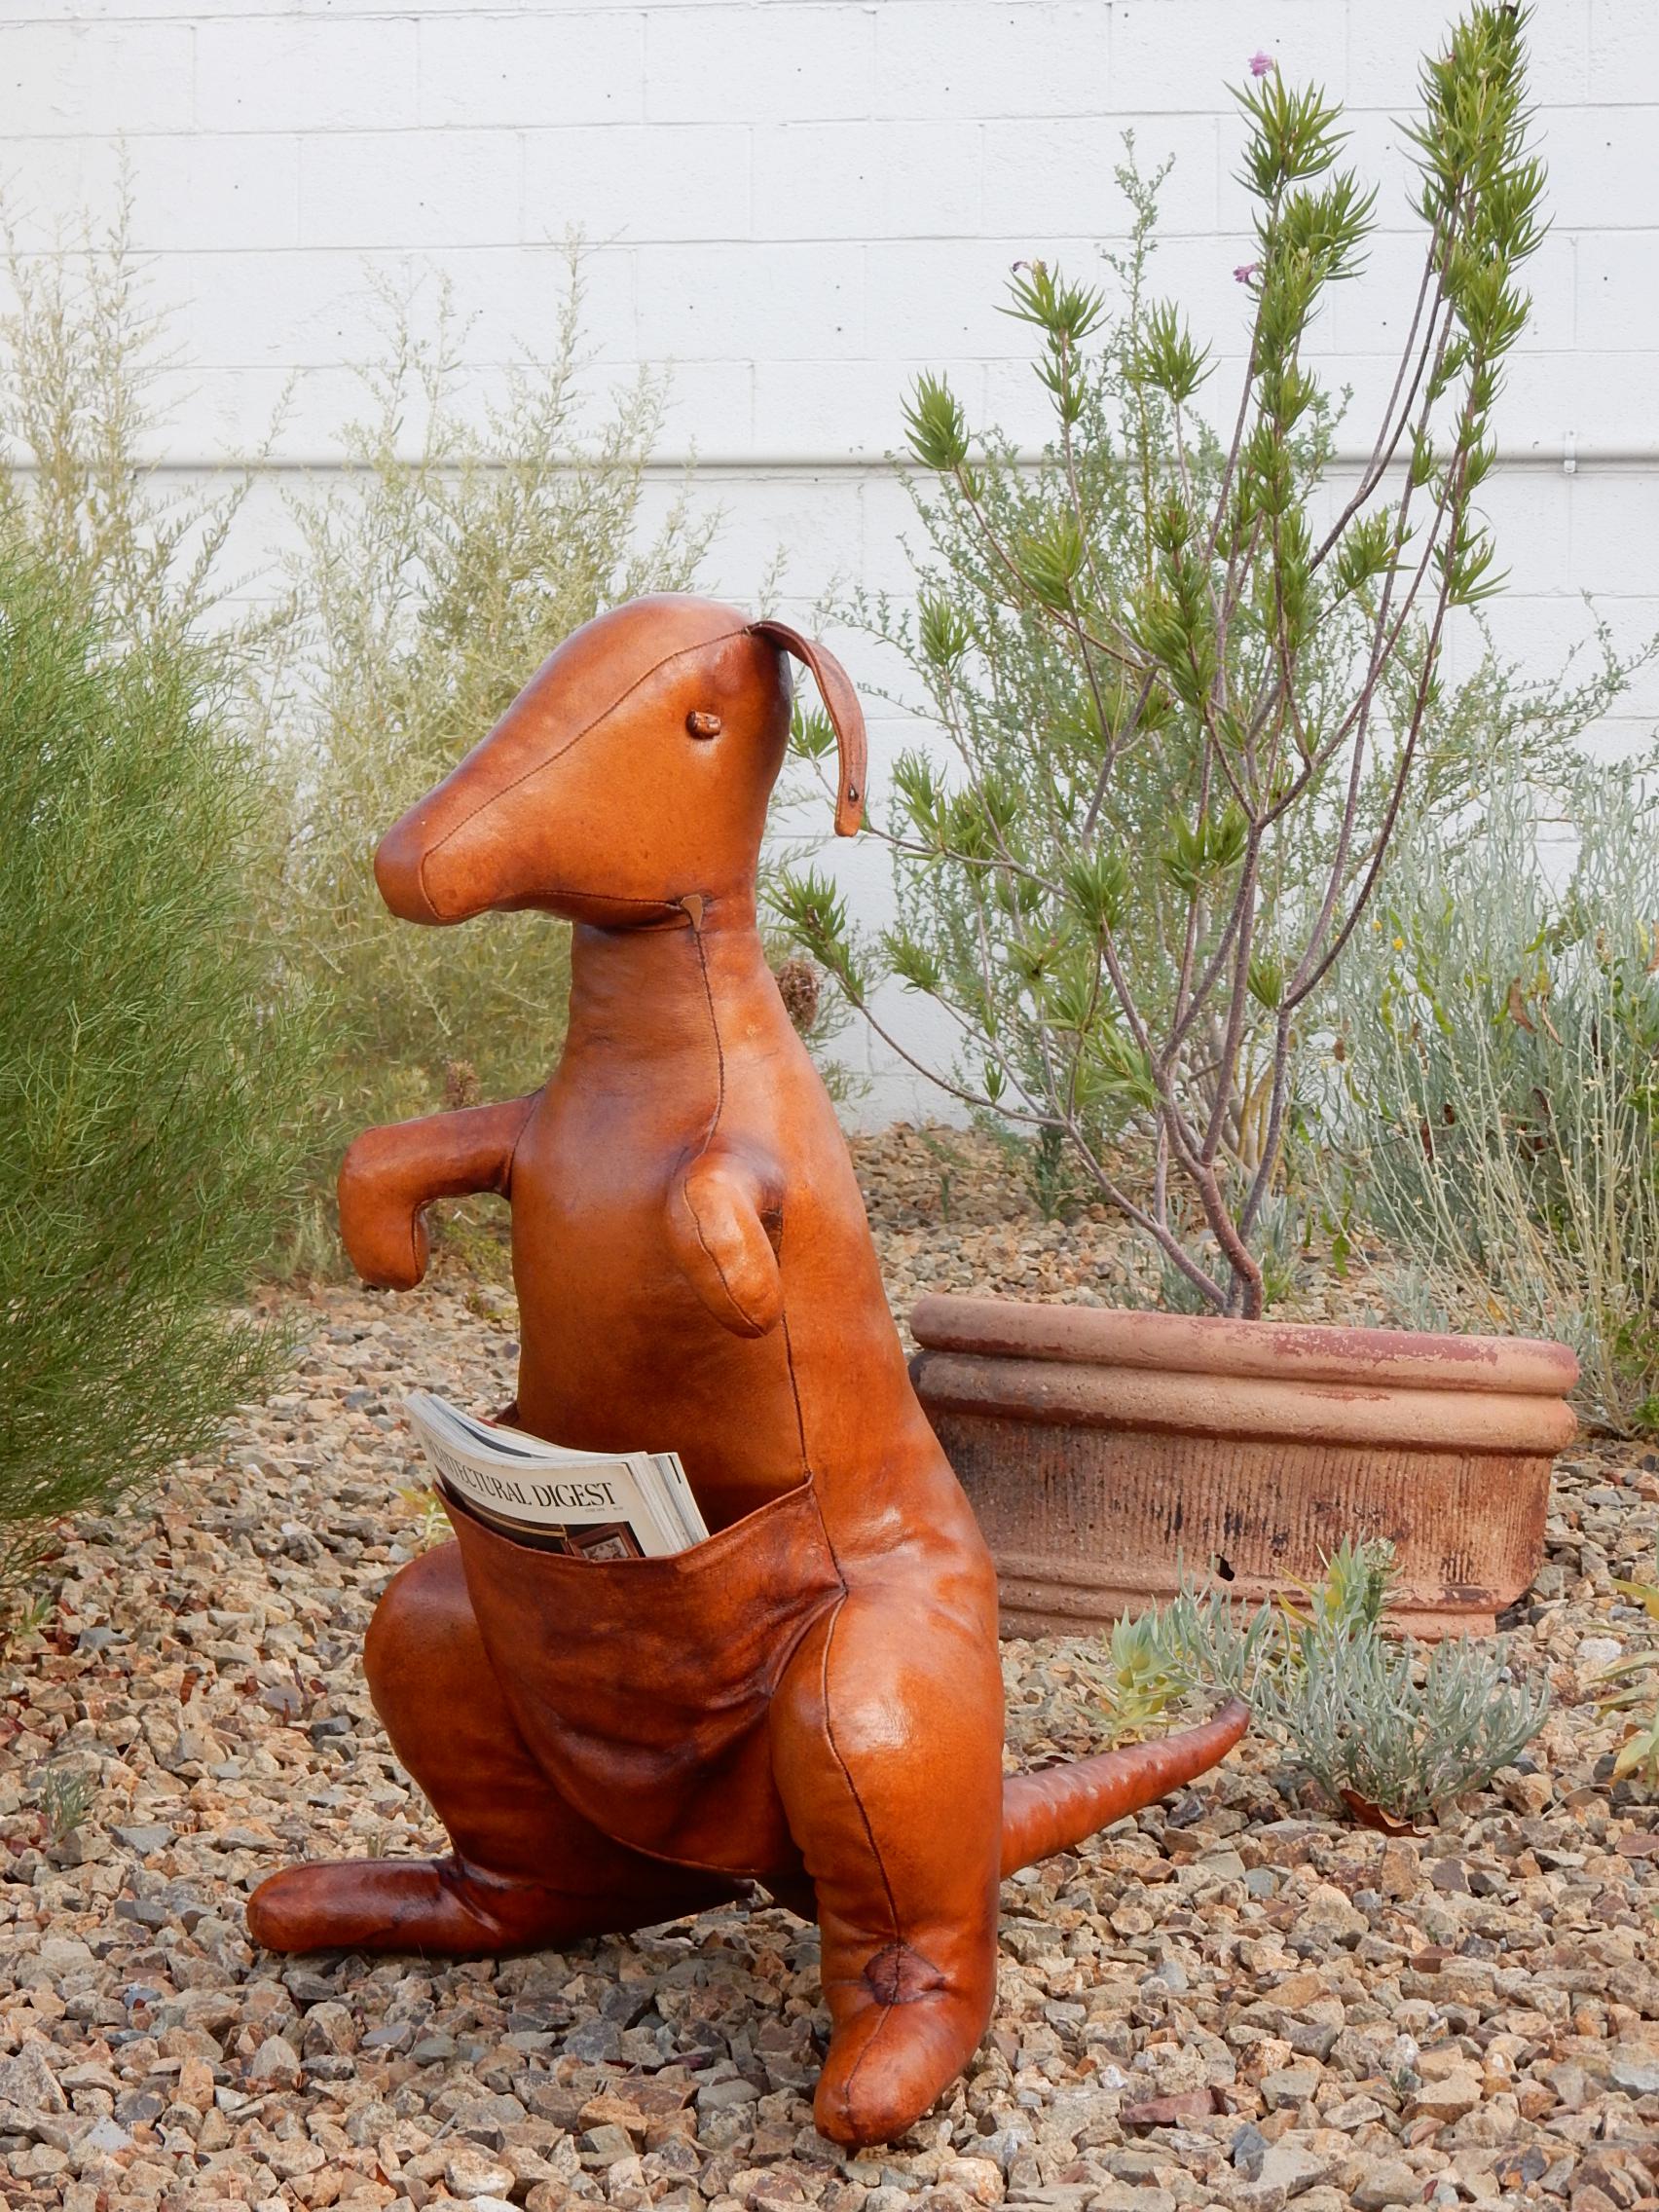 Midcentury Dimitri Omersa leather kangaroo sculpture magazine holder.
Adds a whimsical charm to any decorum.
Holds 4 or 5 standard magazines with ease,
circa 1950s caramel color leather, showing 60+ years of aged patina and charm including few